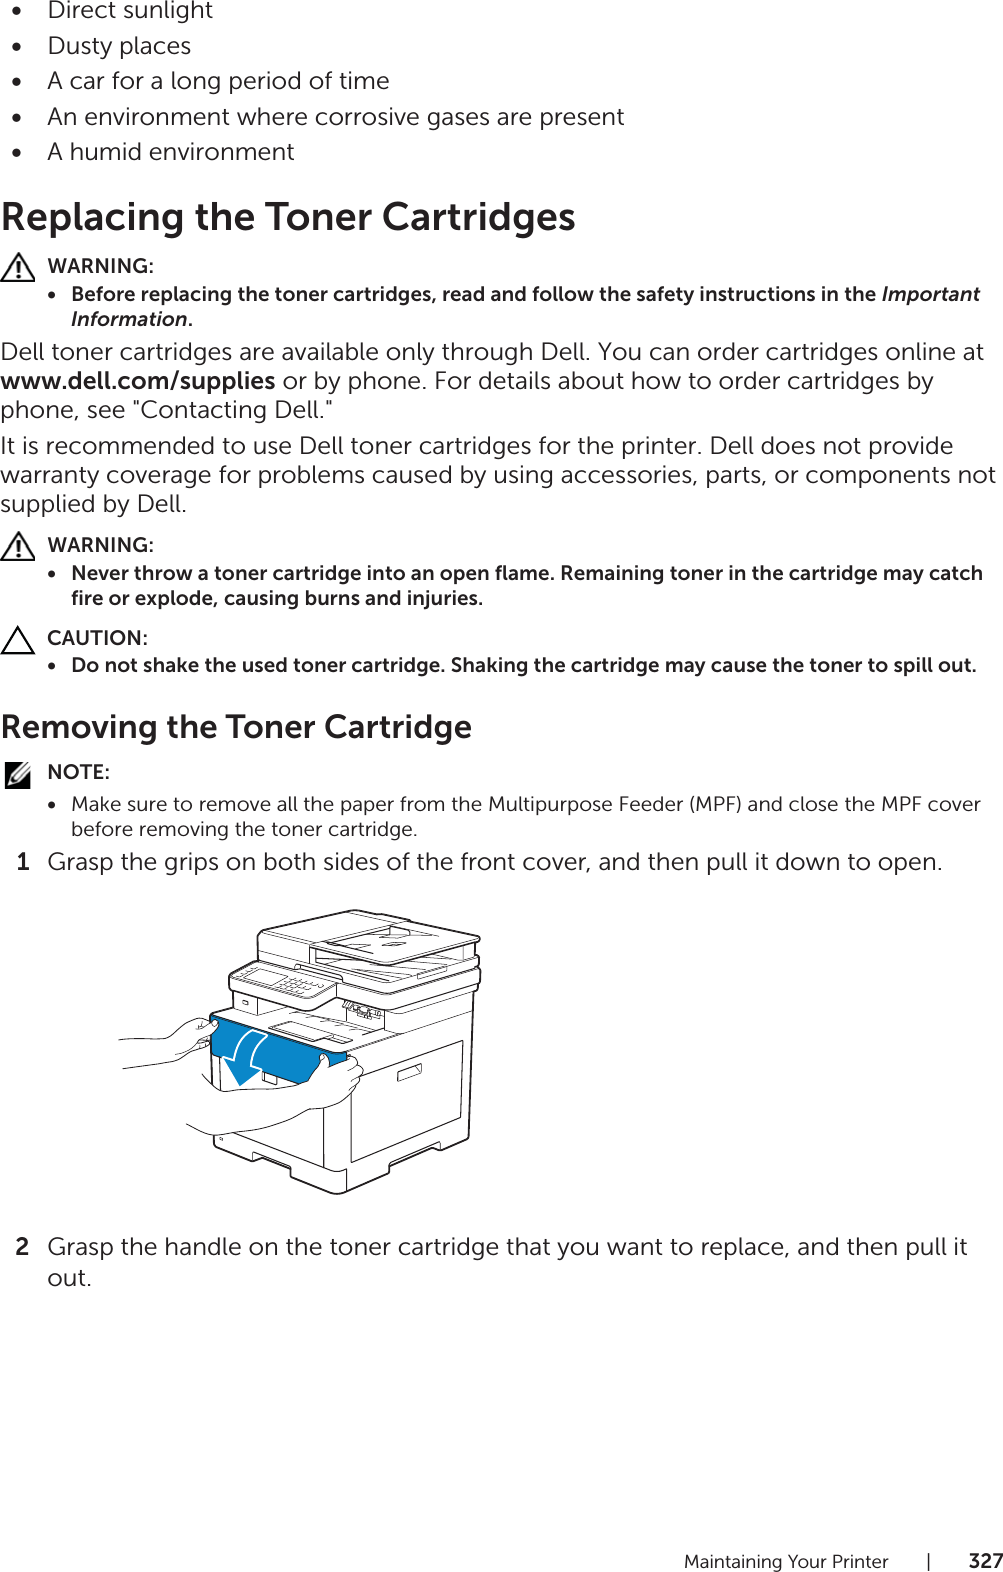 Maintaining Your Printer |327•Direct sunlight•Dusty places•A car for a long period of time•An environment where corrosive gases are present•A humid environmentReplacing the Toner CartridgesWARNING:• Before replacing the toner cartridges, read and follow the safety instructions in the Important Information.Dell toner cartridges are available only through Dell. You can order cartridges online at www.dell.com/supplies or by phone. For details about how to order cartridges by phone, see &quot;Contacting Dell.&quot;It is recommended to use Dell toner cartridges for the printer. Dell does not provide warranty coverage for problems caused by using accessories, parts, or components not supplied by Dell.WARNING:• Never throw a toner cartridge into an open flame. Remaining toner in the cartridge may catch fire or explode, causing burns and injuries.CAUTION:• Do not shake the used toner cartridge. Shaking the cartridge may cause the toner to spill out.Removing the Toner CartridgeNOTE:•Make sure to remove all the paper from the Multipurpose Feeder (MPF) and close the MPF cover before removing the toner cartridge.1Grasp the grips on both sides of the front cover, and then pull it down to open.2Grasp the handle on the toner cartridge that you want to replace, and then pull it out.